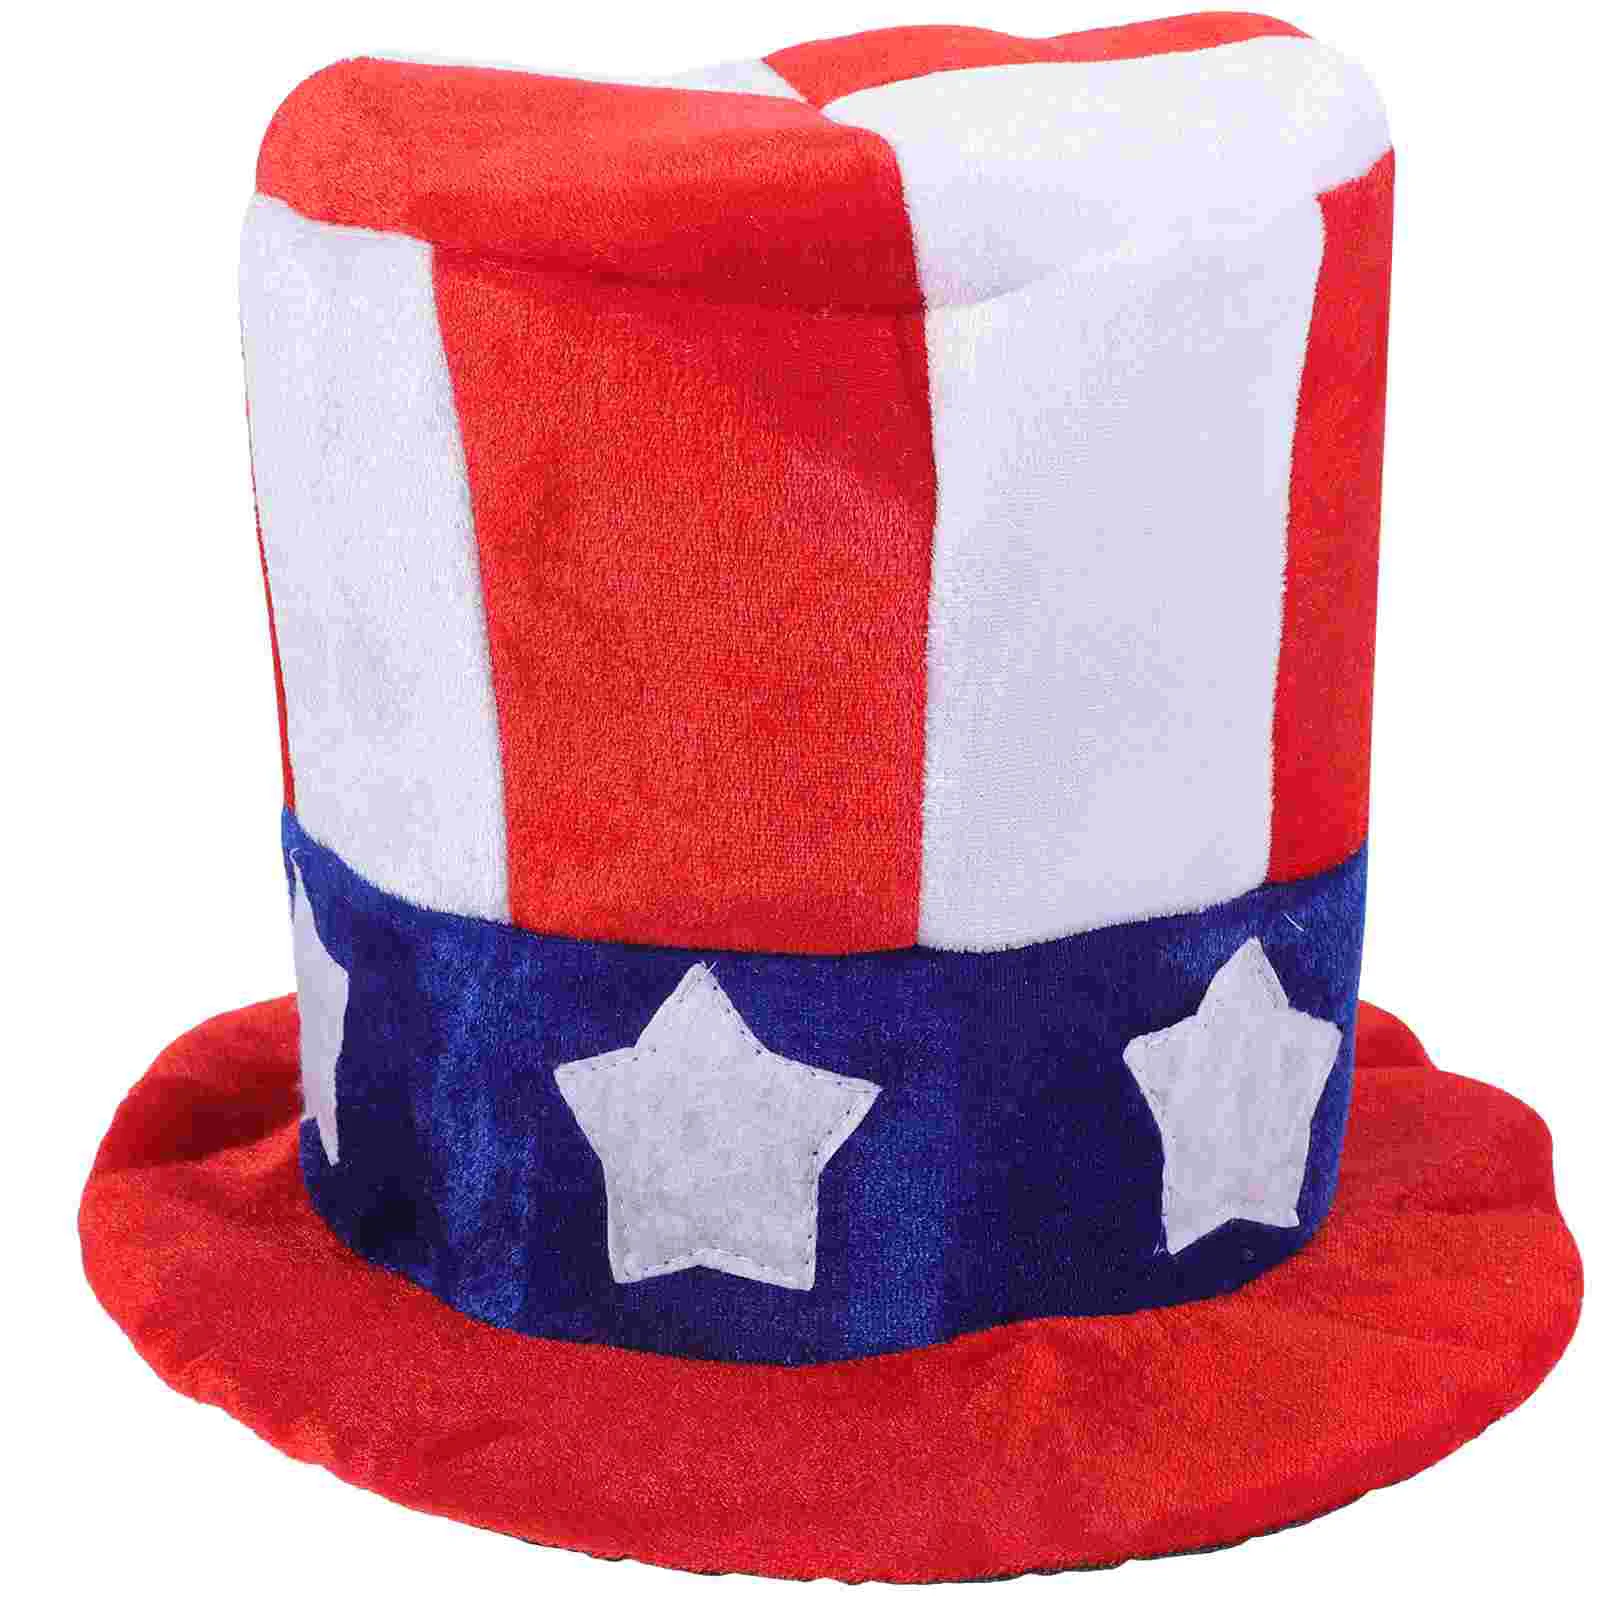 

Men Hats Independence Day Usa Flag Party Decorative Glitter Patriotic Make National Supplies Forth July Man